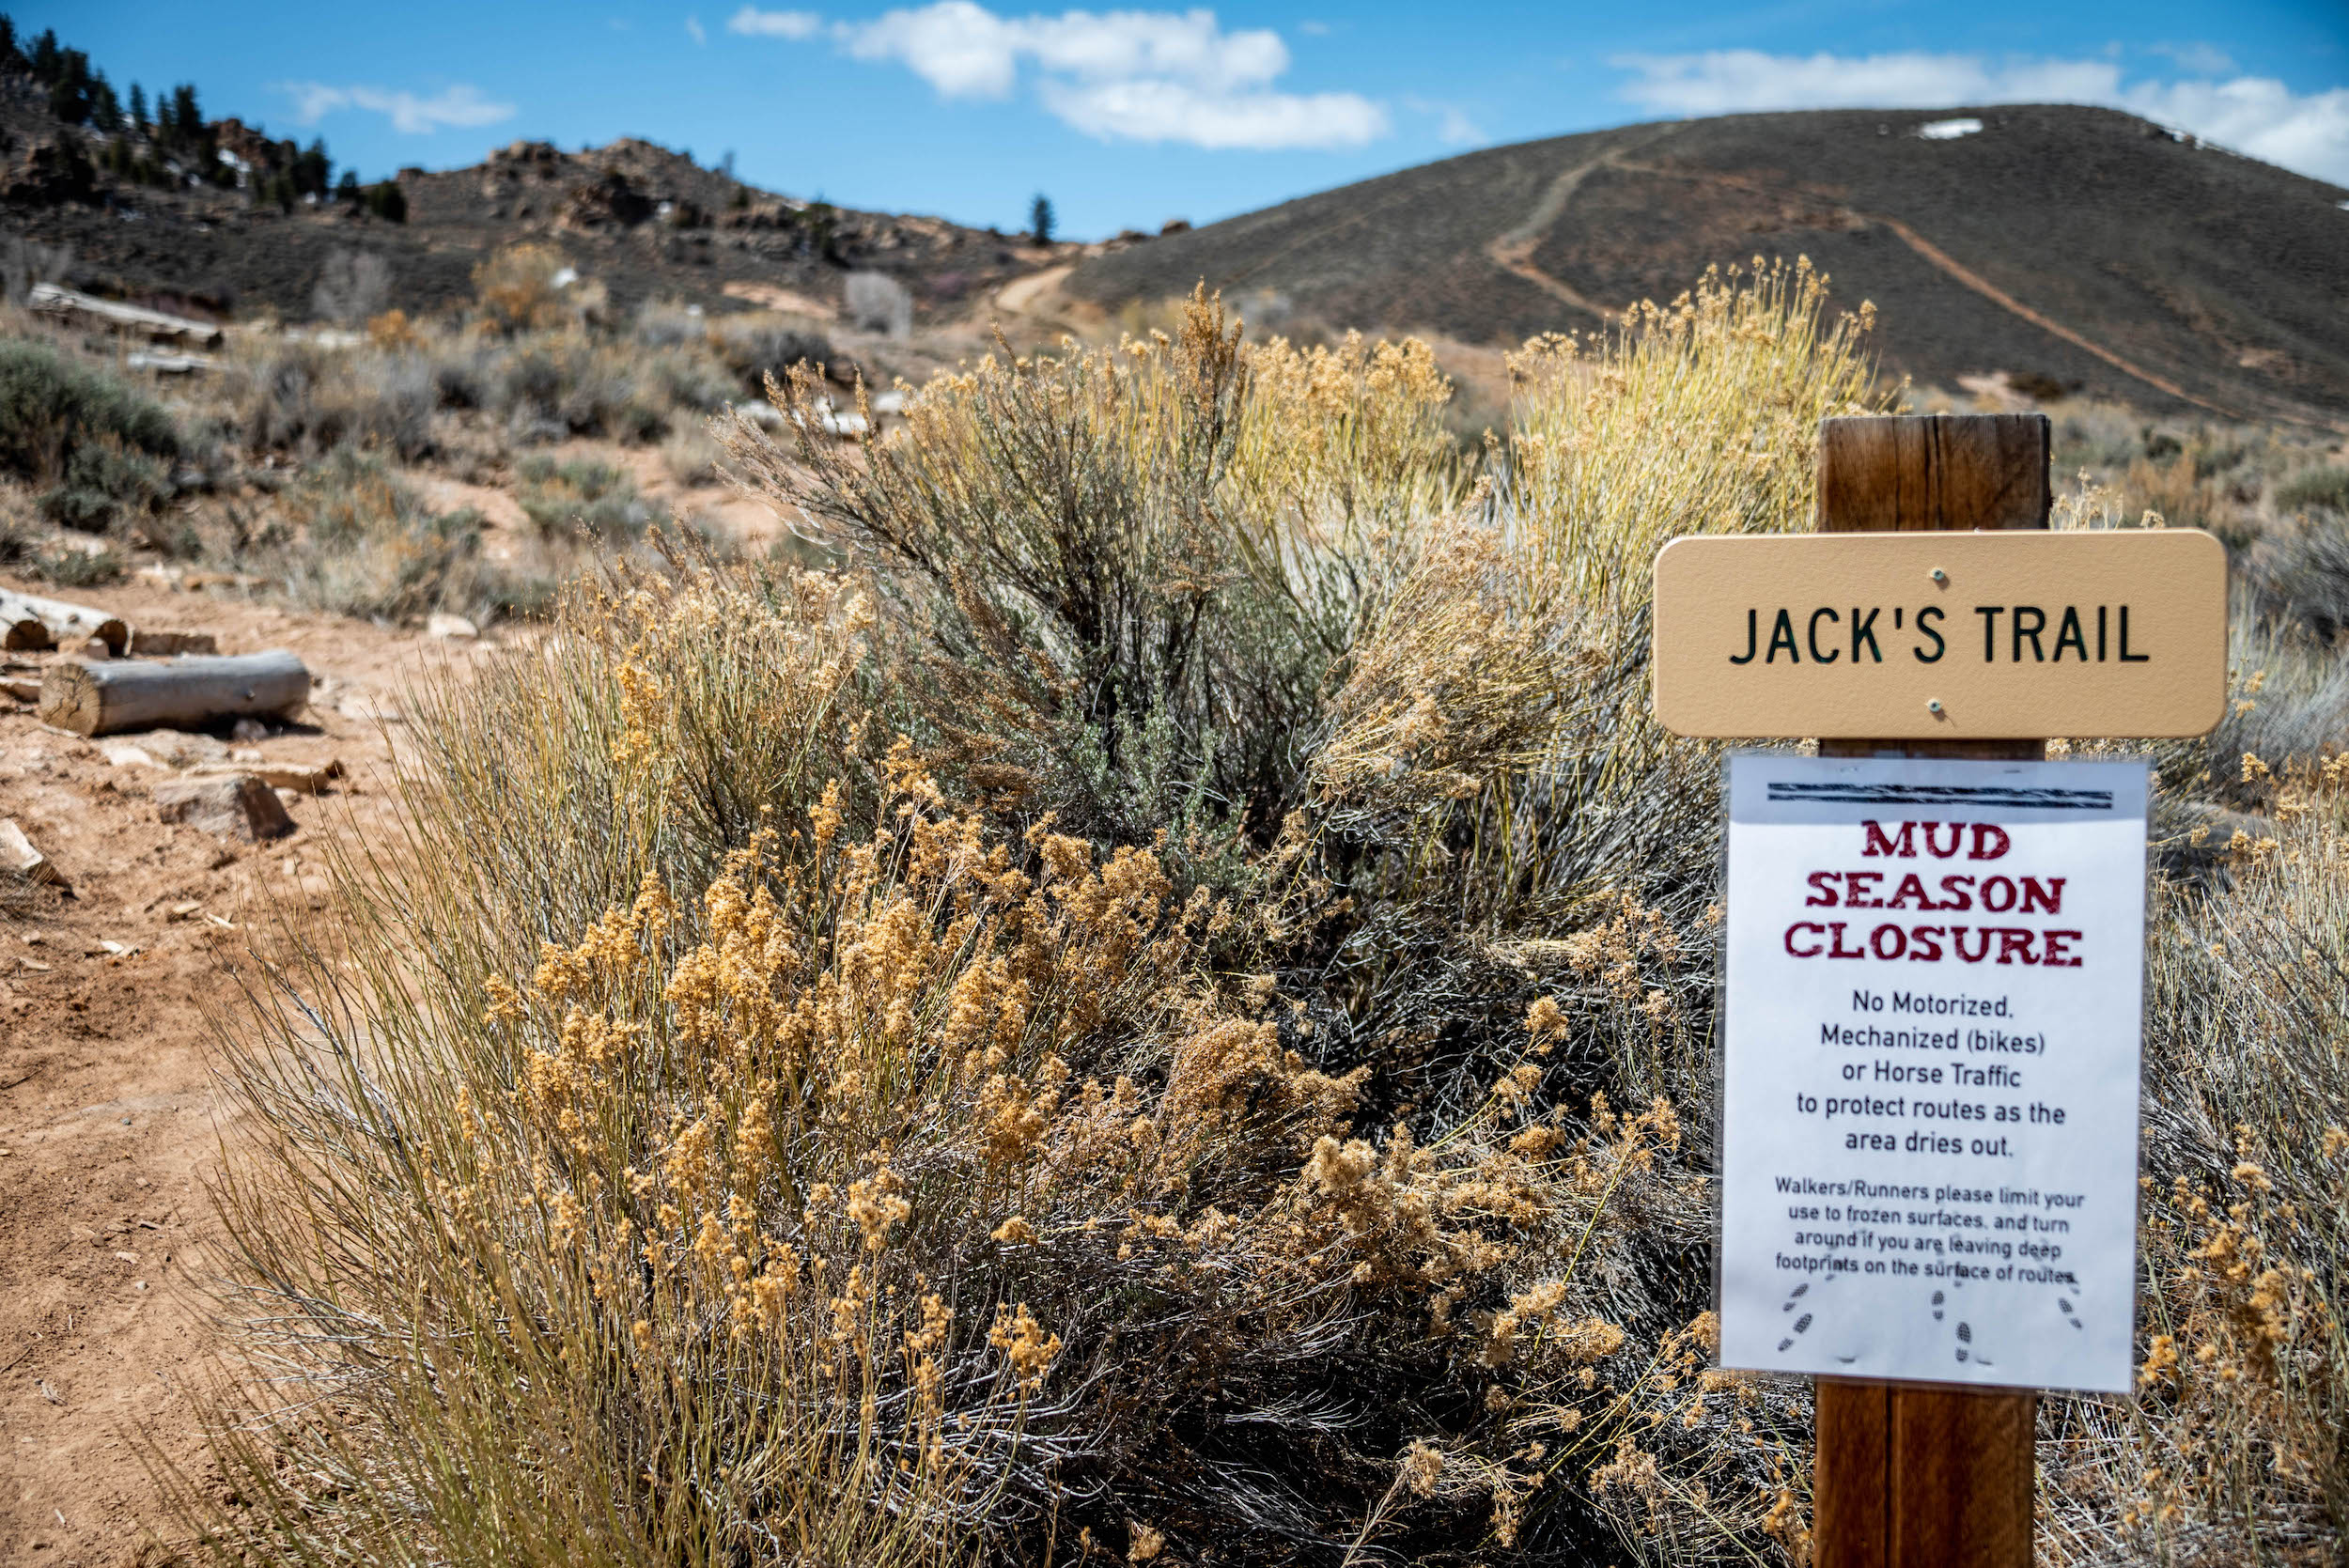 A sign that says "mud season closure" to indicate a trail is closed to motorized traffic during mud season at hartman rocks